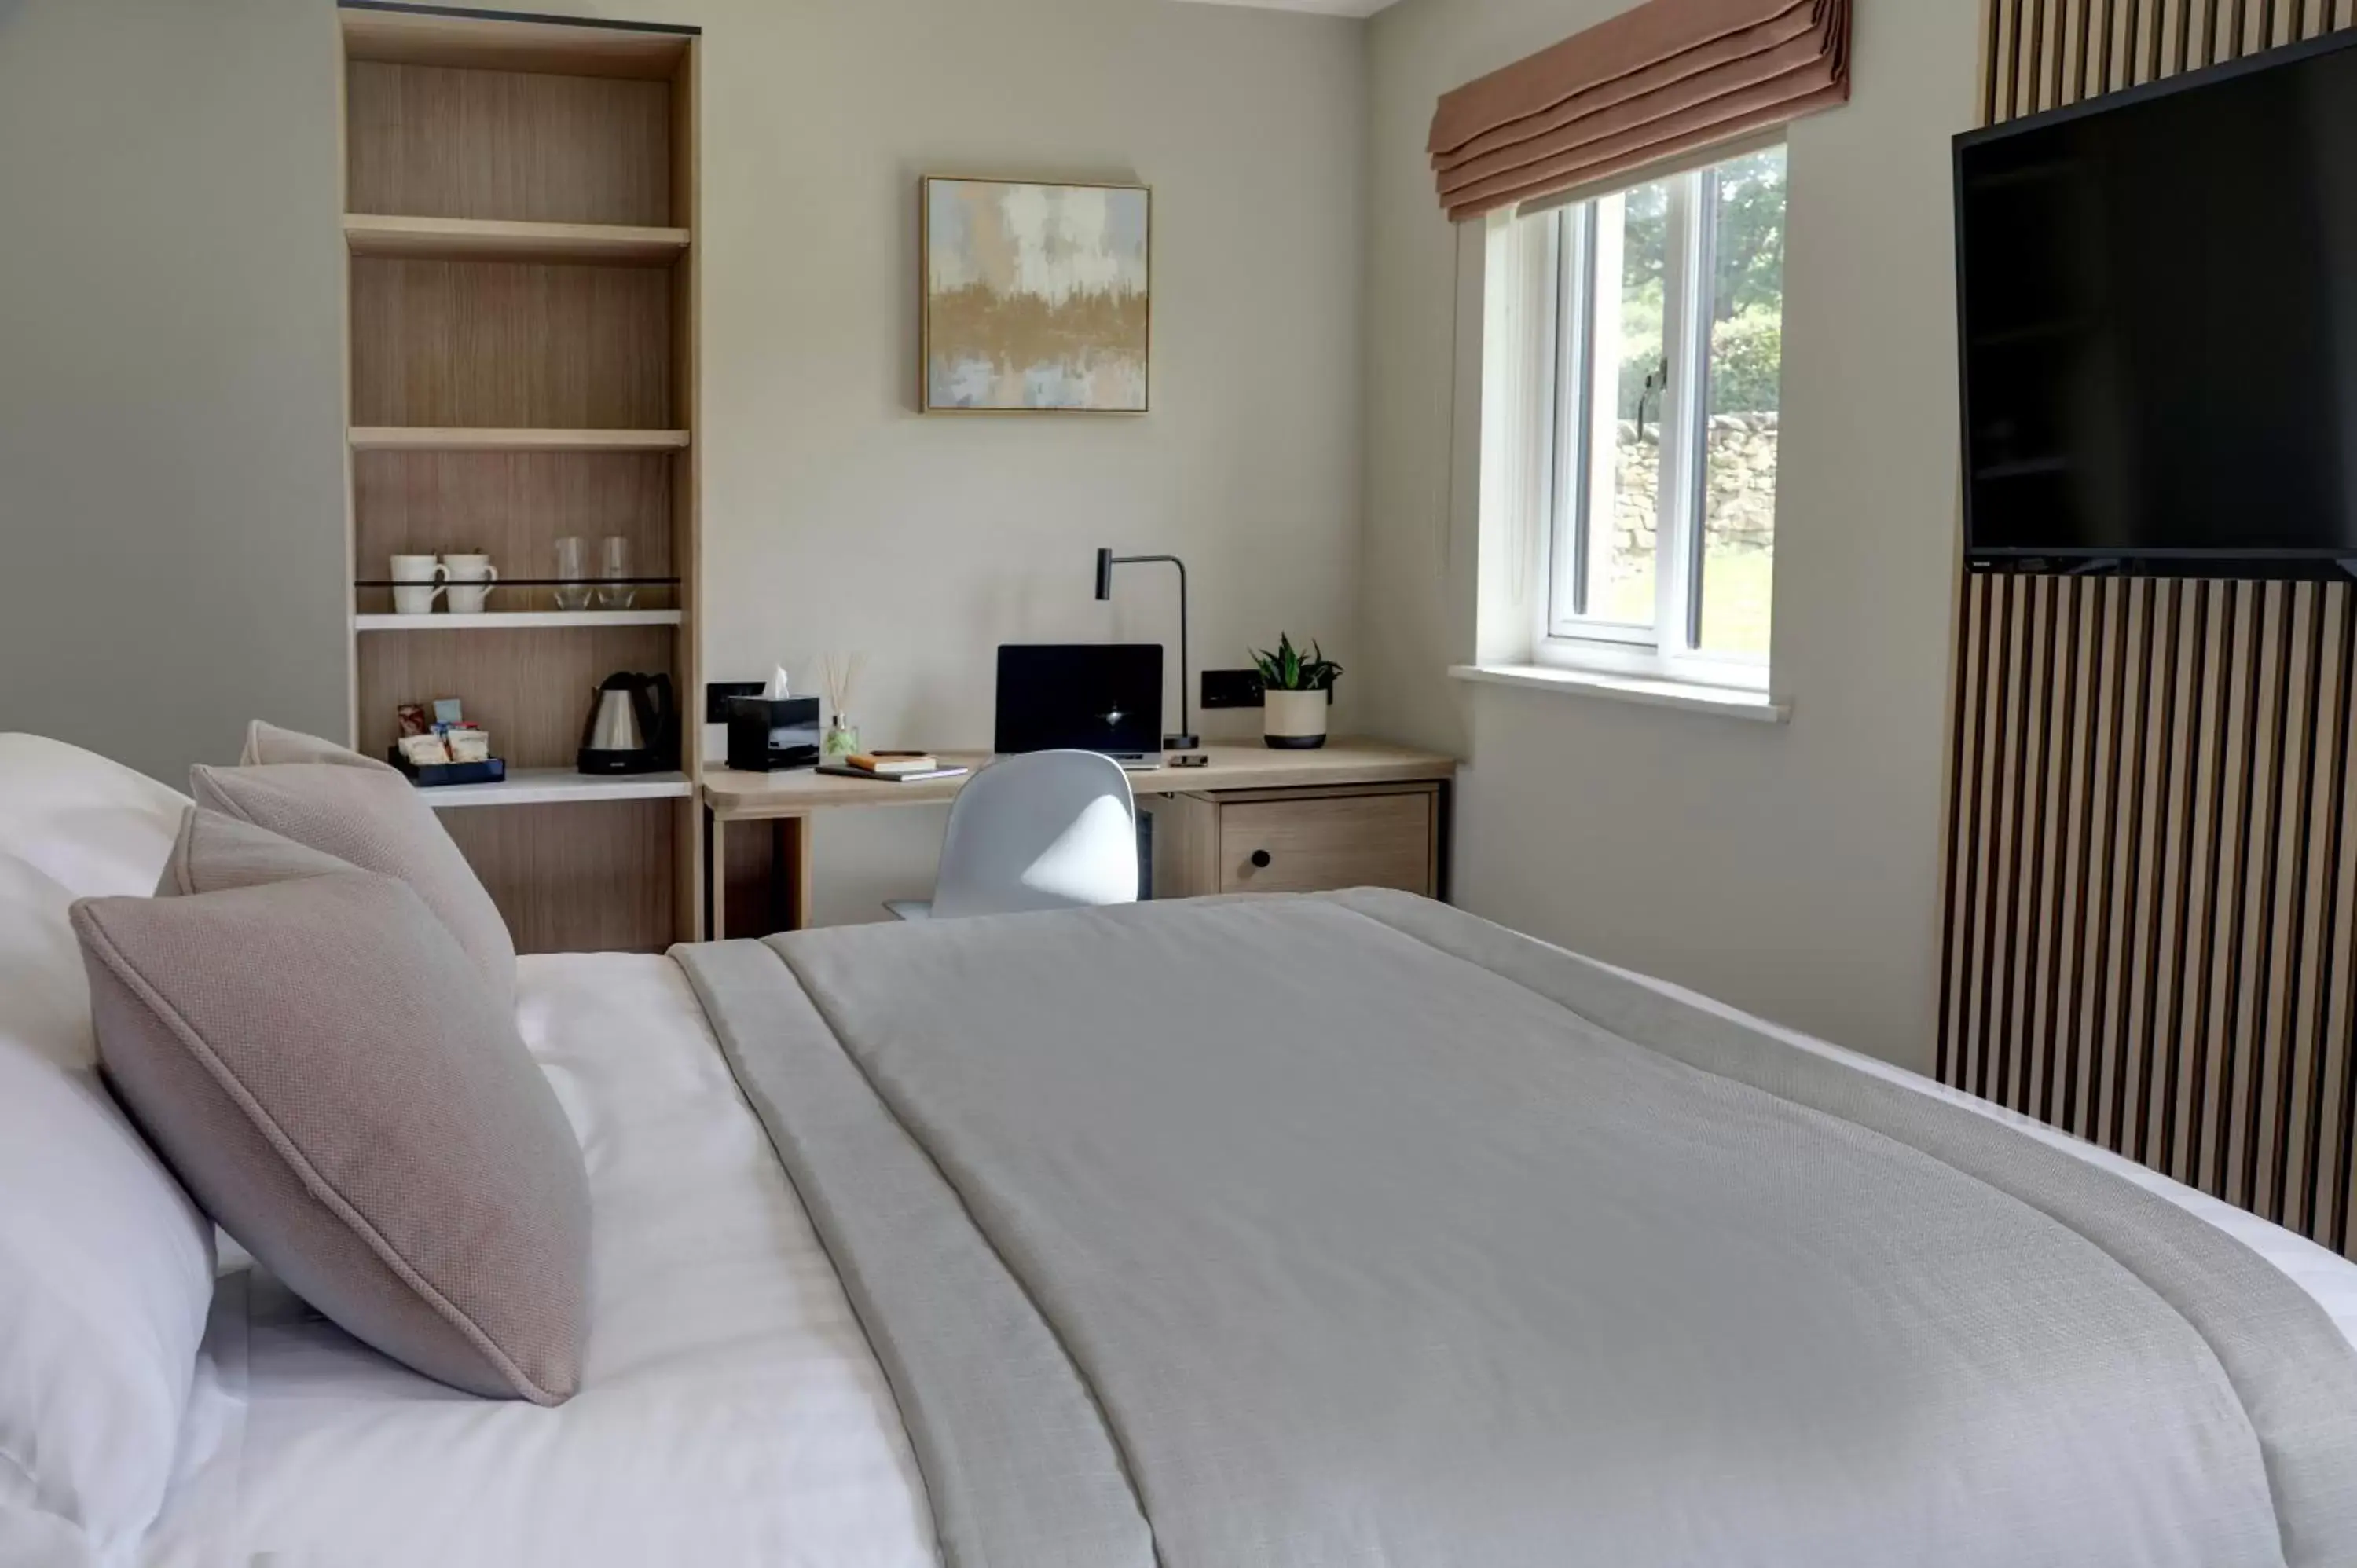 Bed, Room Photo in Mytton Fold Hotel, Ribble Valley